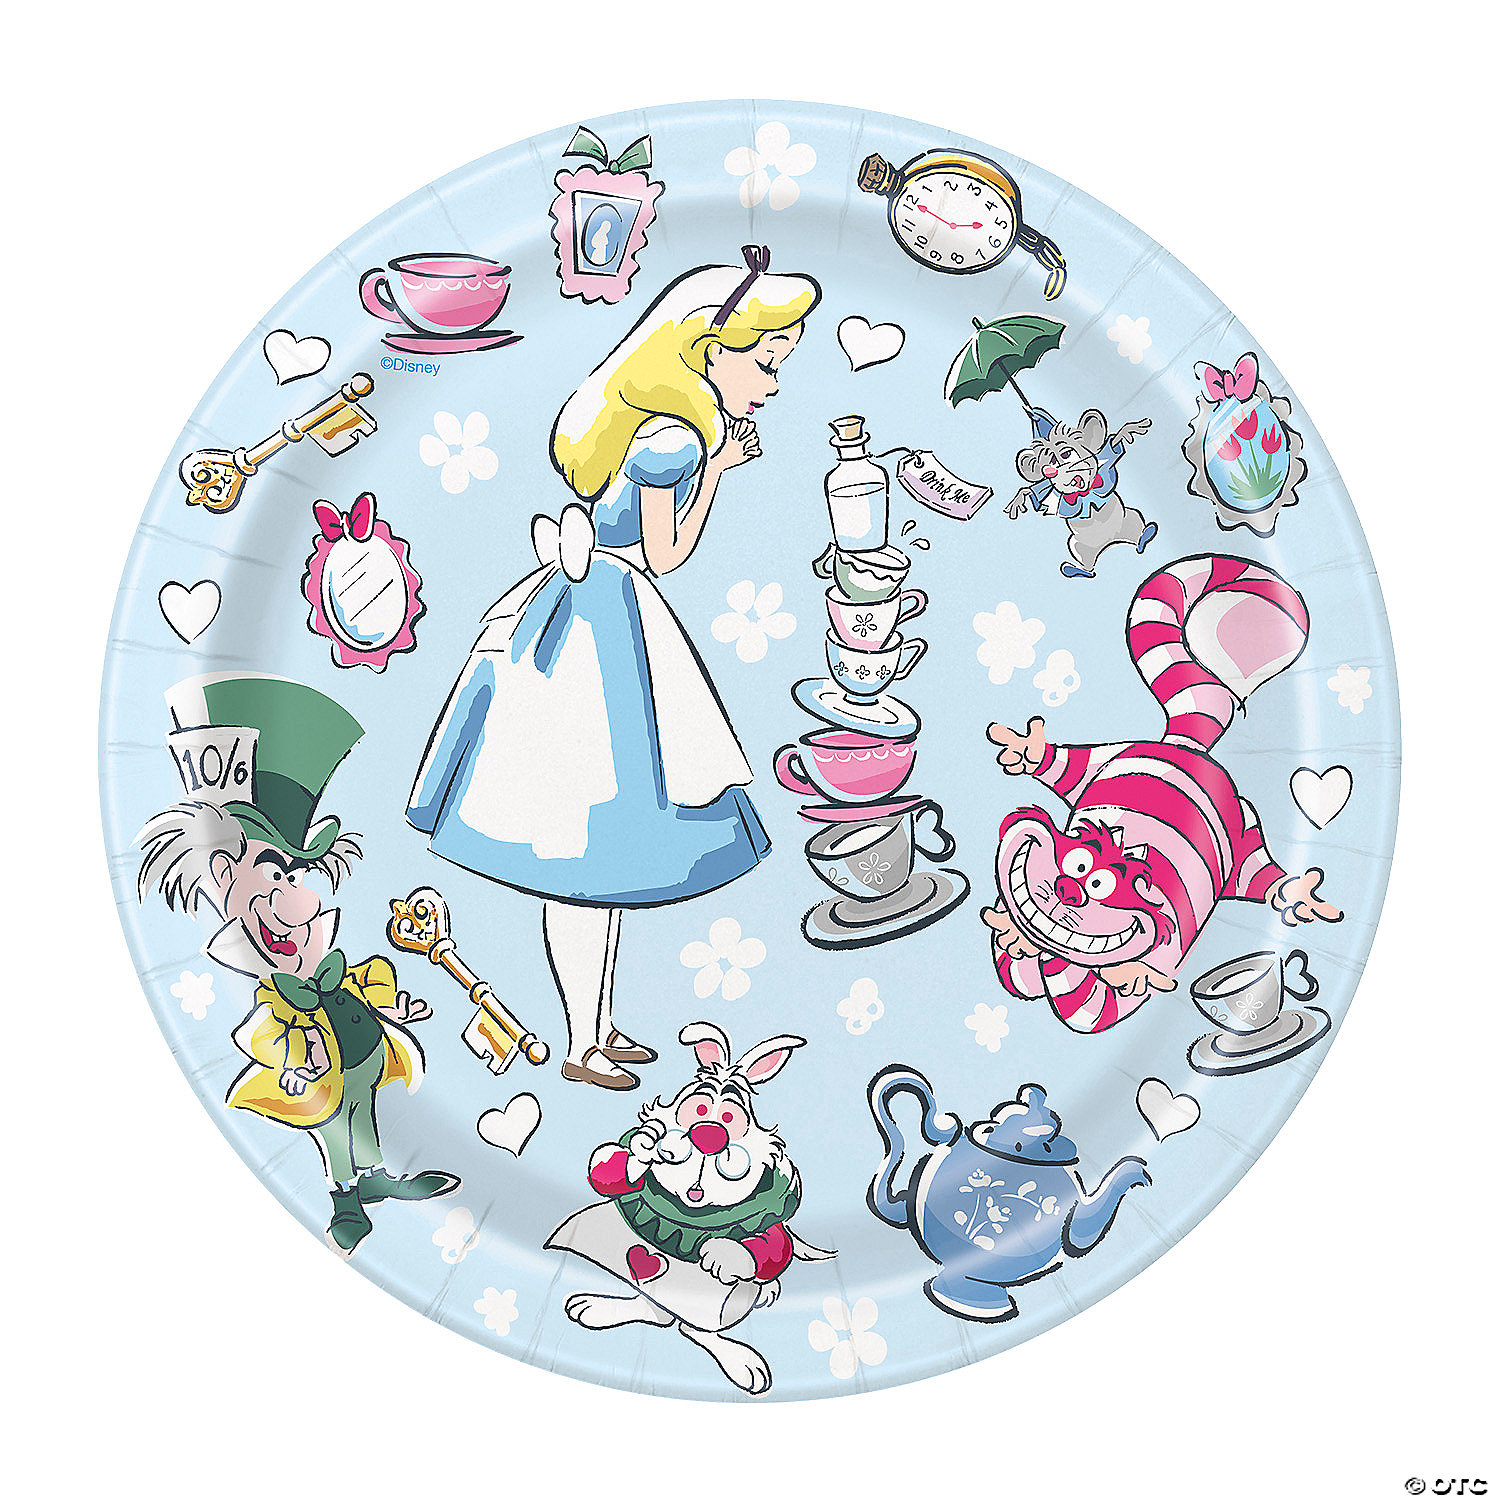 Disney Alice in Wonderland Plate Cute set of 5 pieces Rare Boxed Japan F/S New 